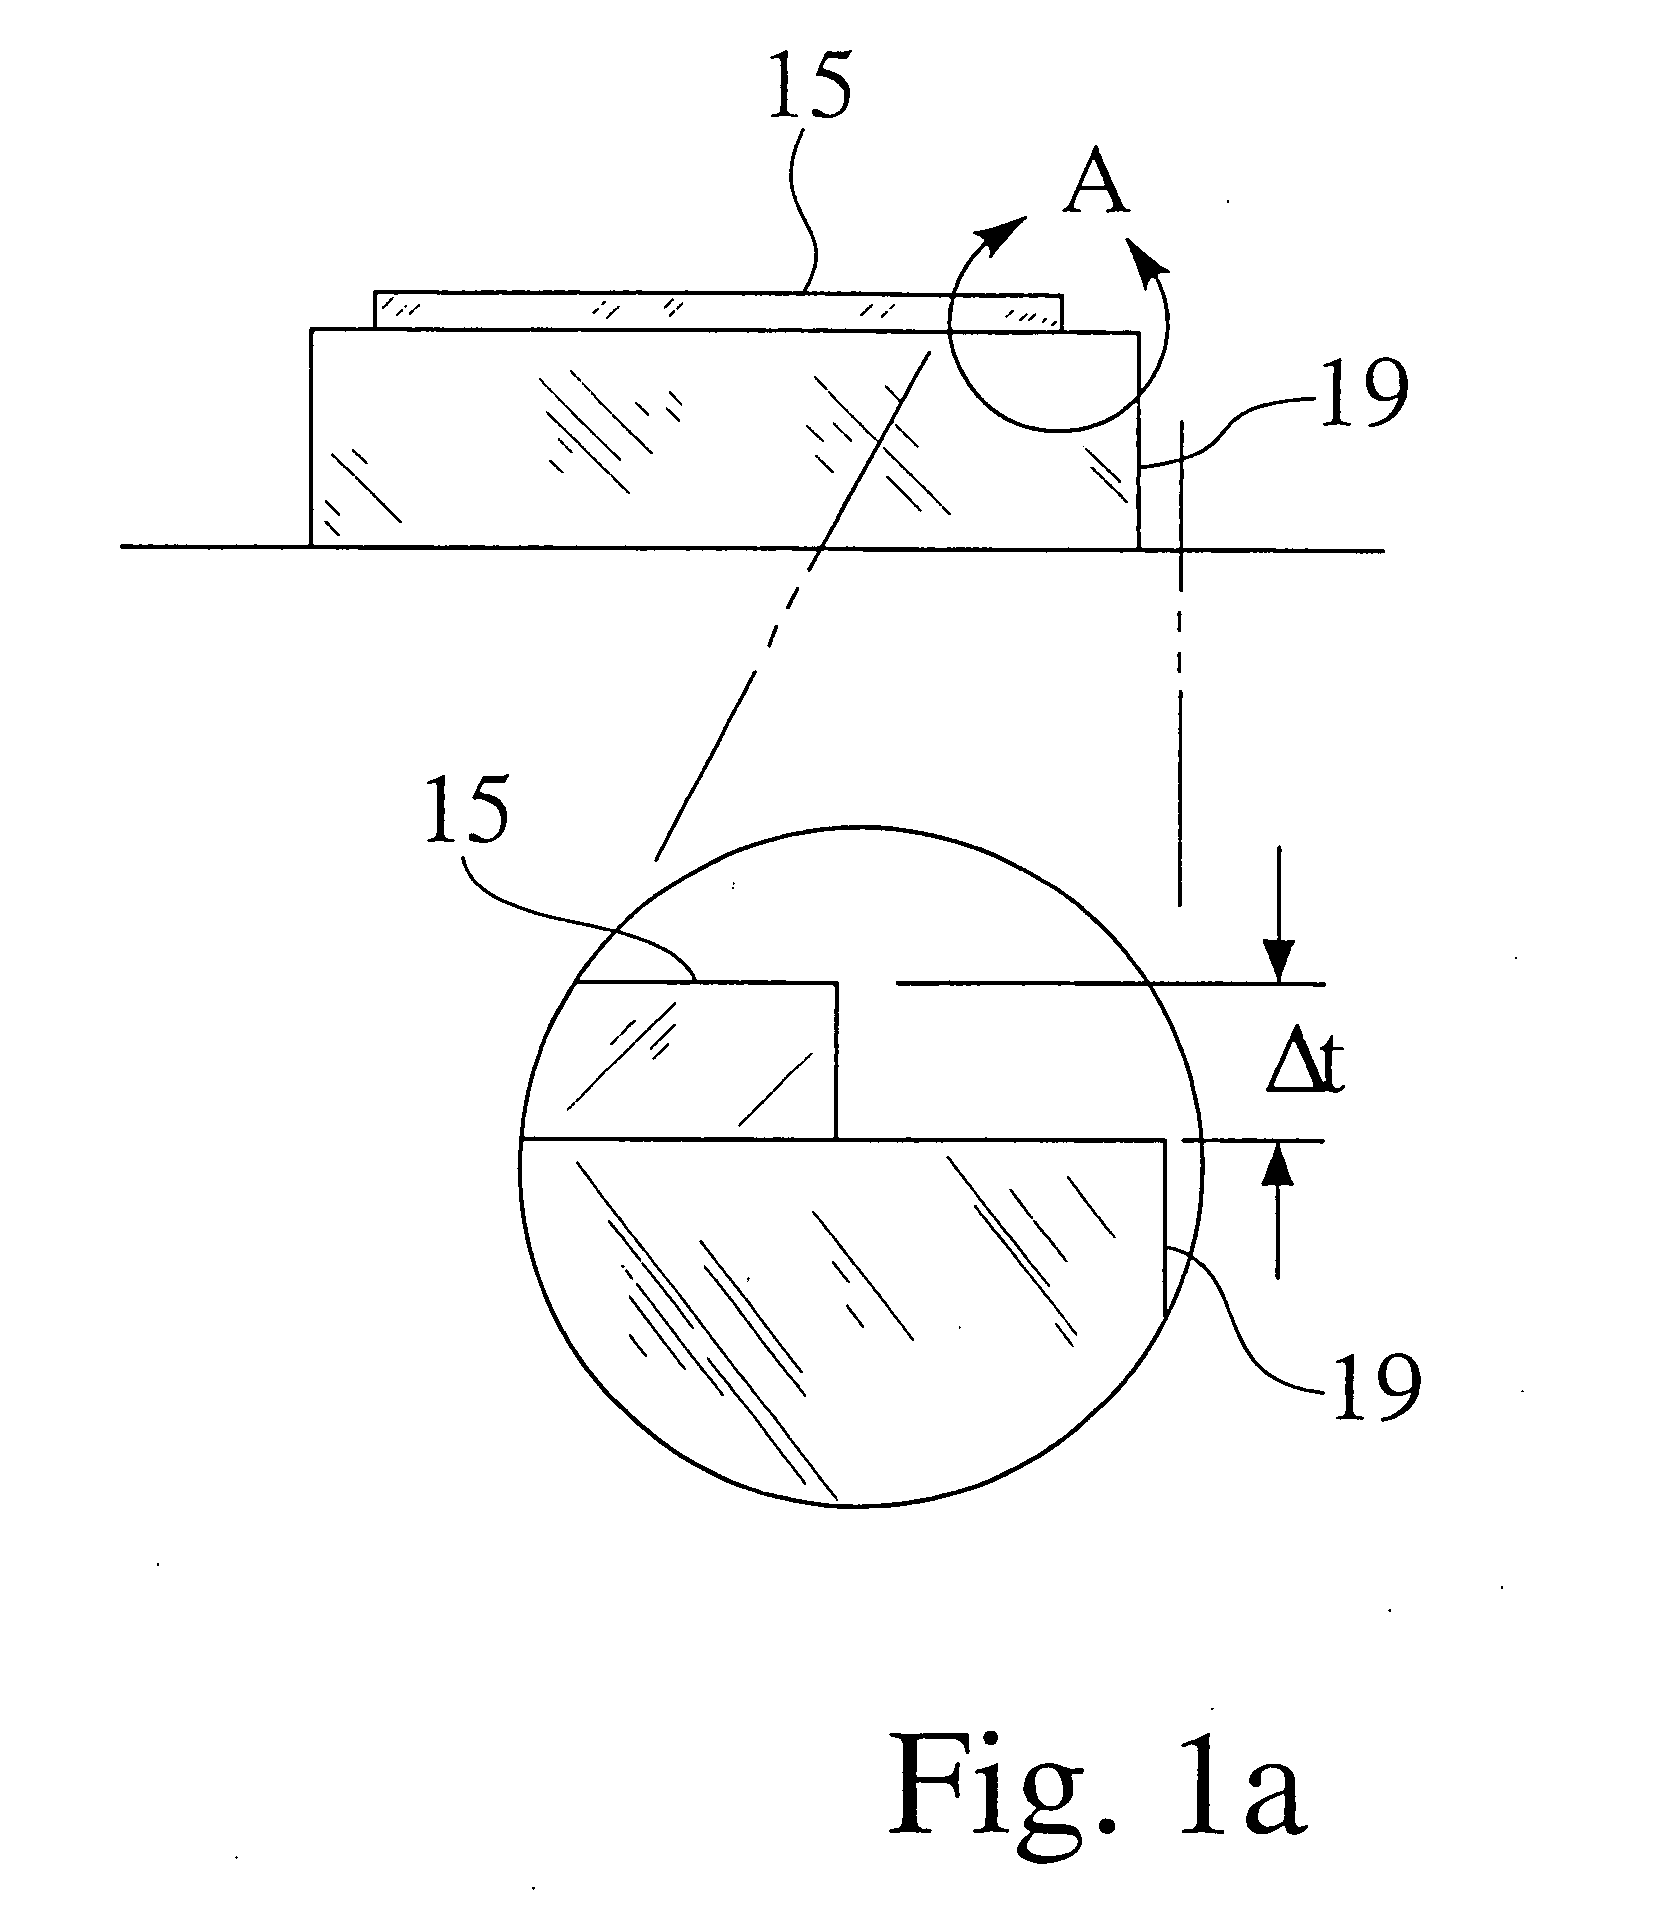 Powder feeder for material deposition systems